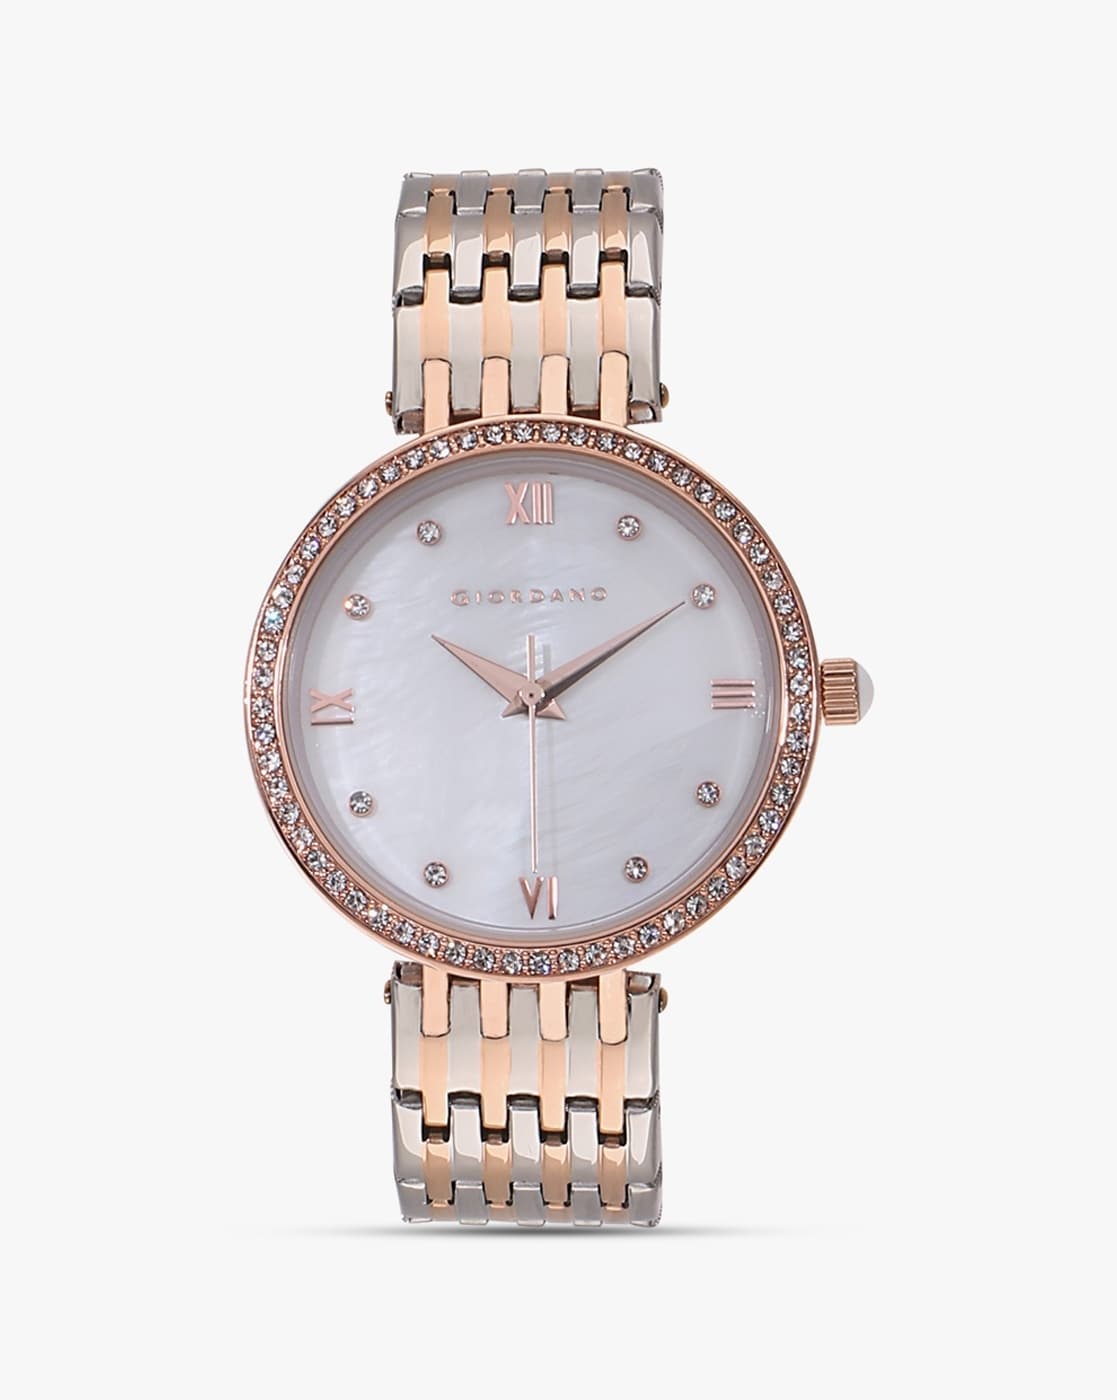 Giordano Analog Watch for Women with Diamond Studded Rose Gold Case and  Metal Strap Ladies Wrist Watch Gift for Women A2079-22 : Amazon.in: Fashion